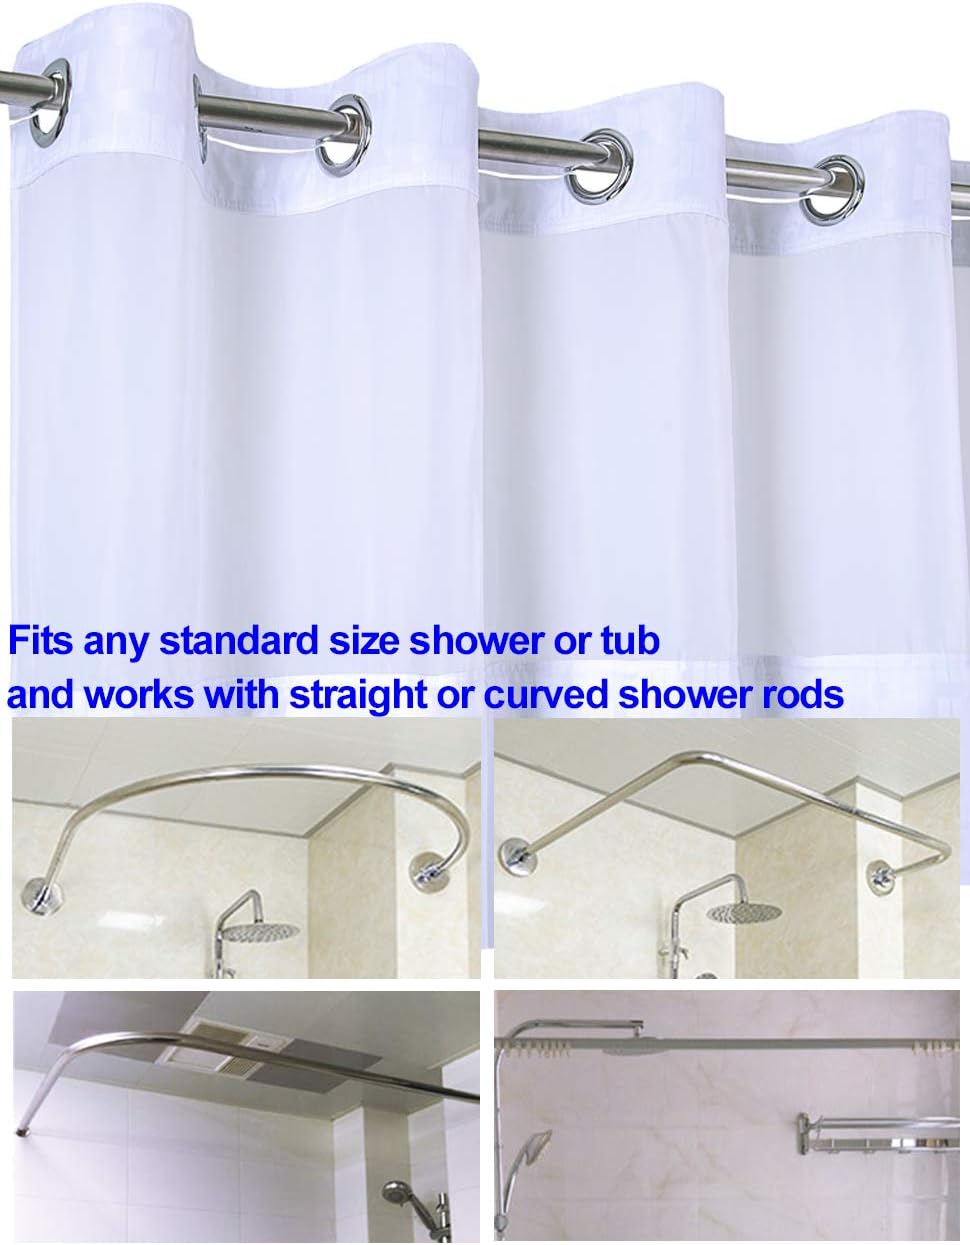 Generic Conbo Mio Hotel Style No Hooks, Hotel Style Curved Shower Curtain Rod